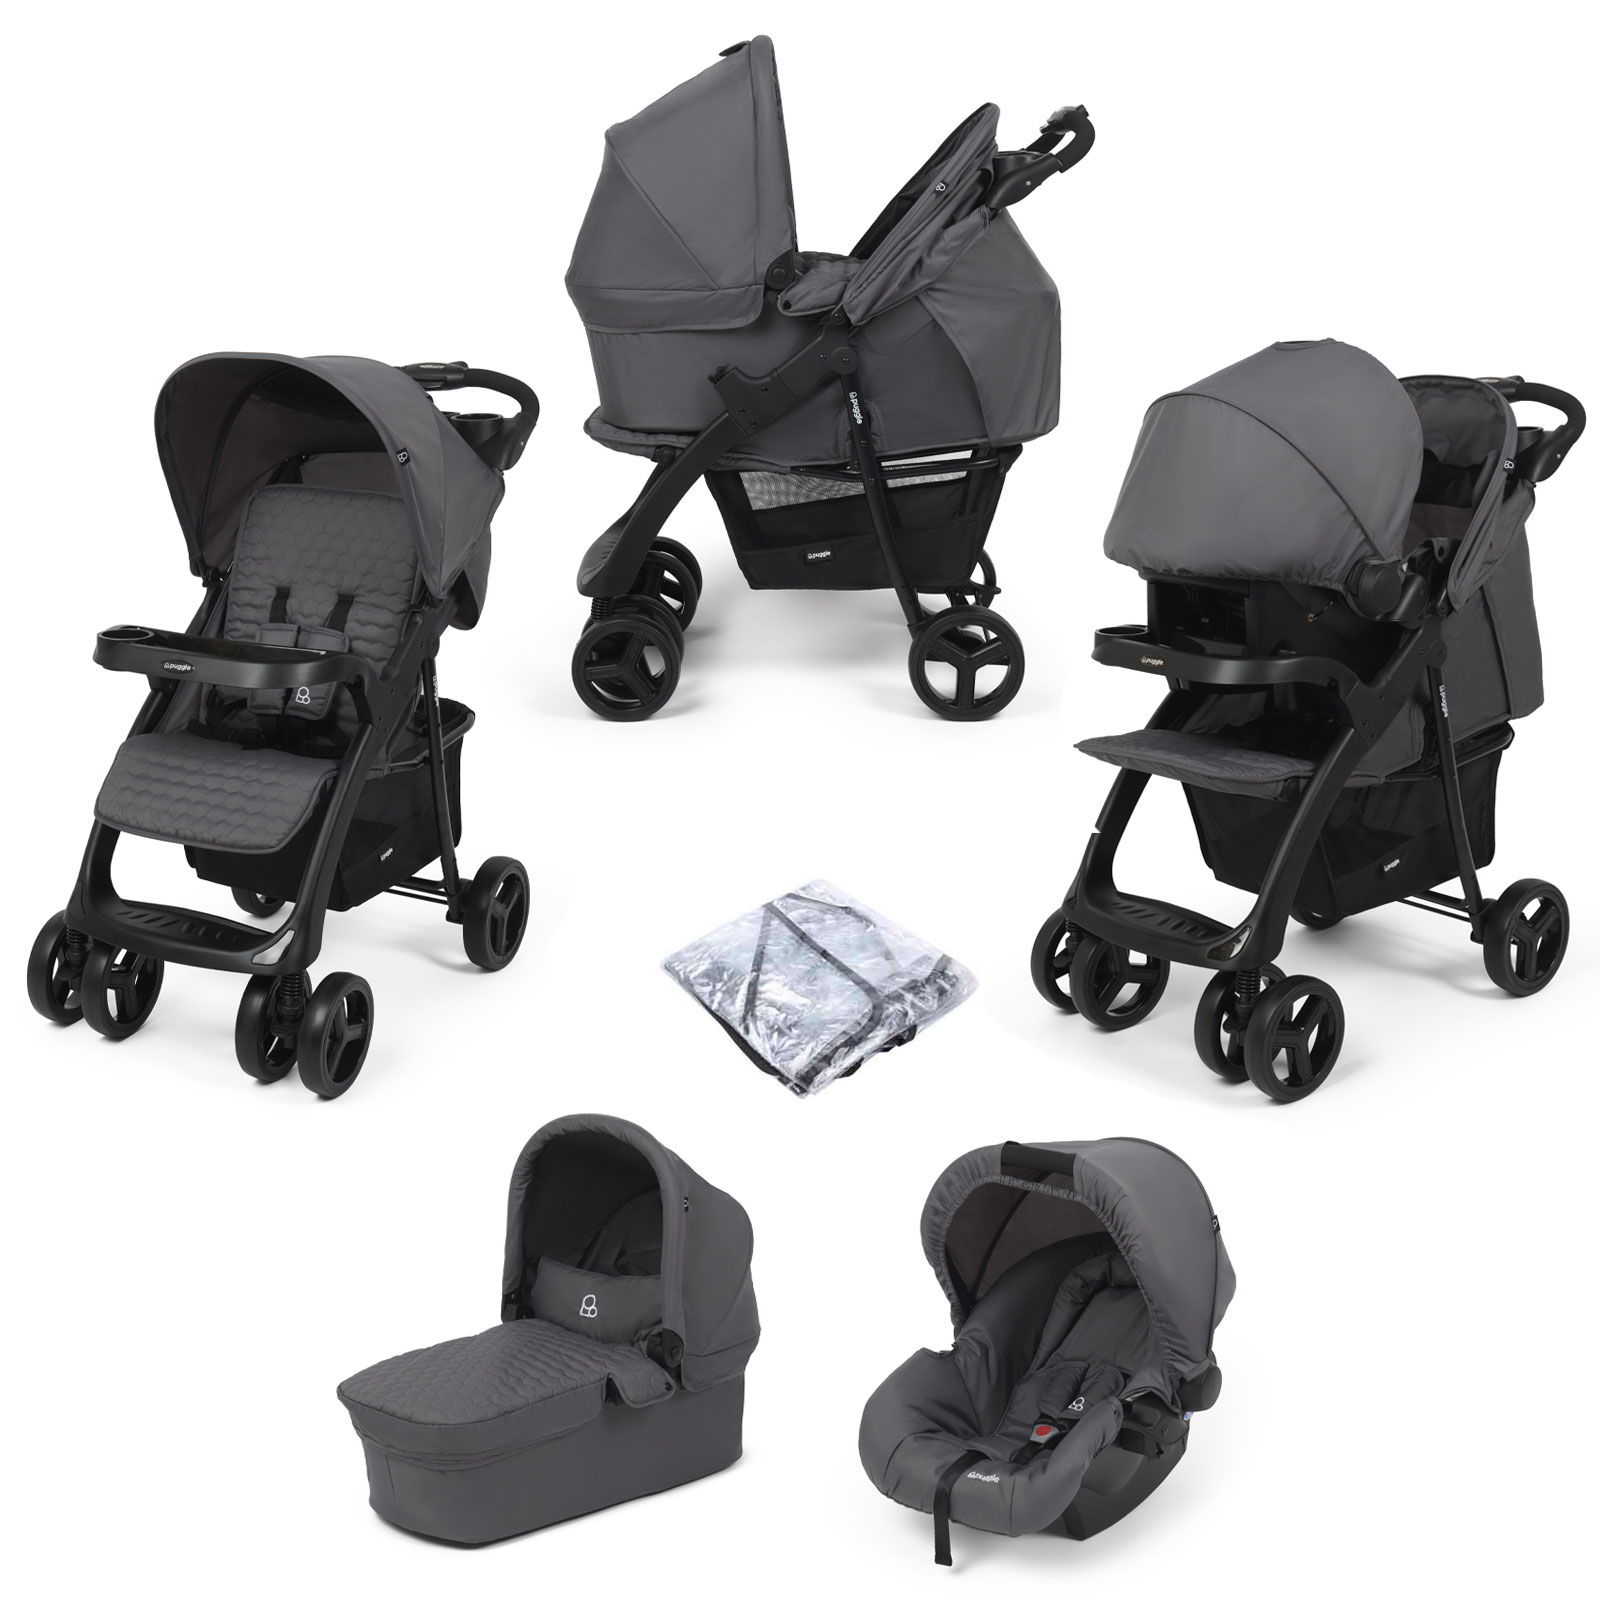 Puggle Denver Luxe 3in1 Travel System with Raincover - Slate Grey